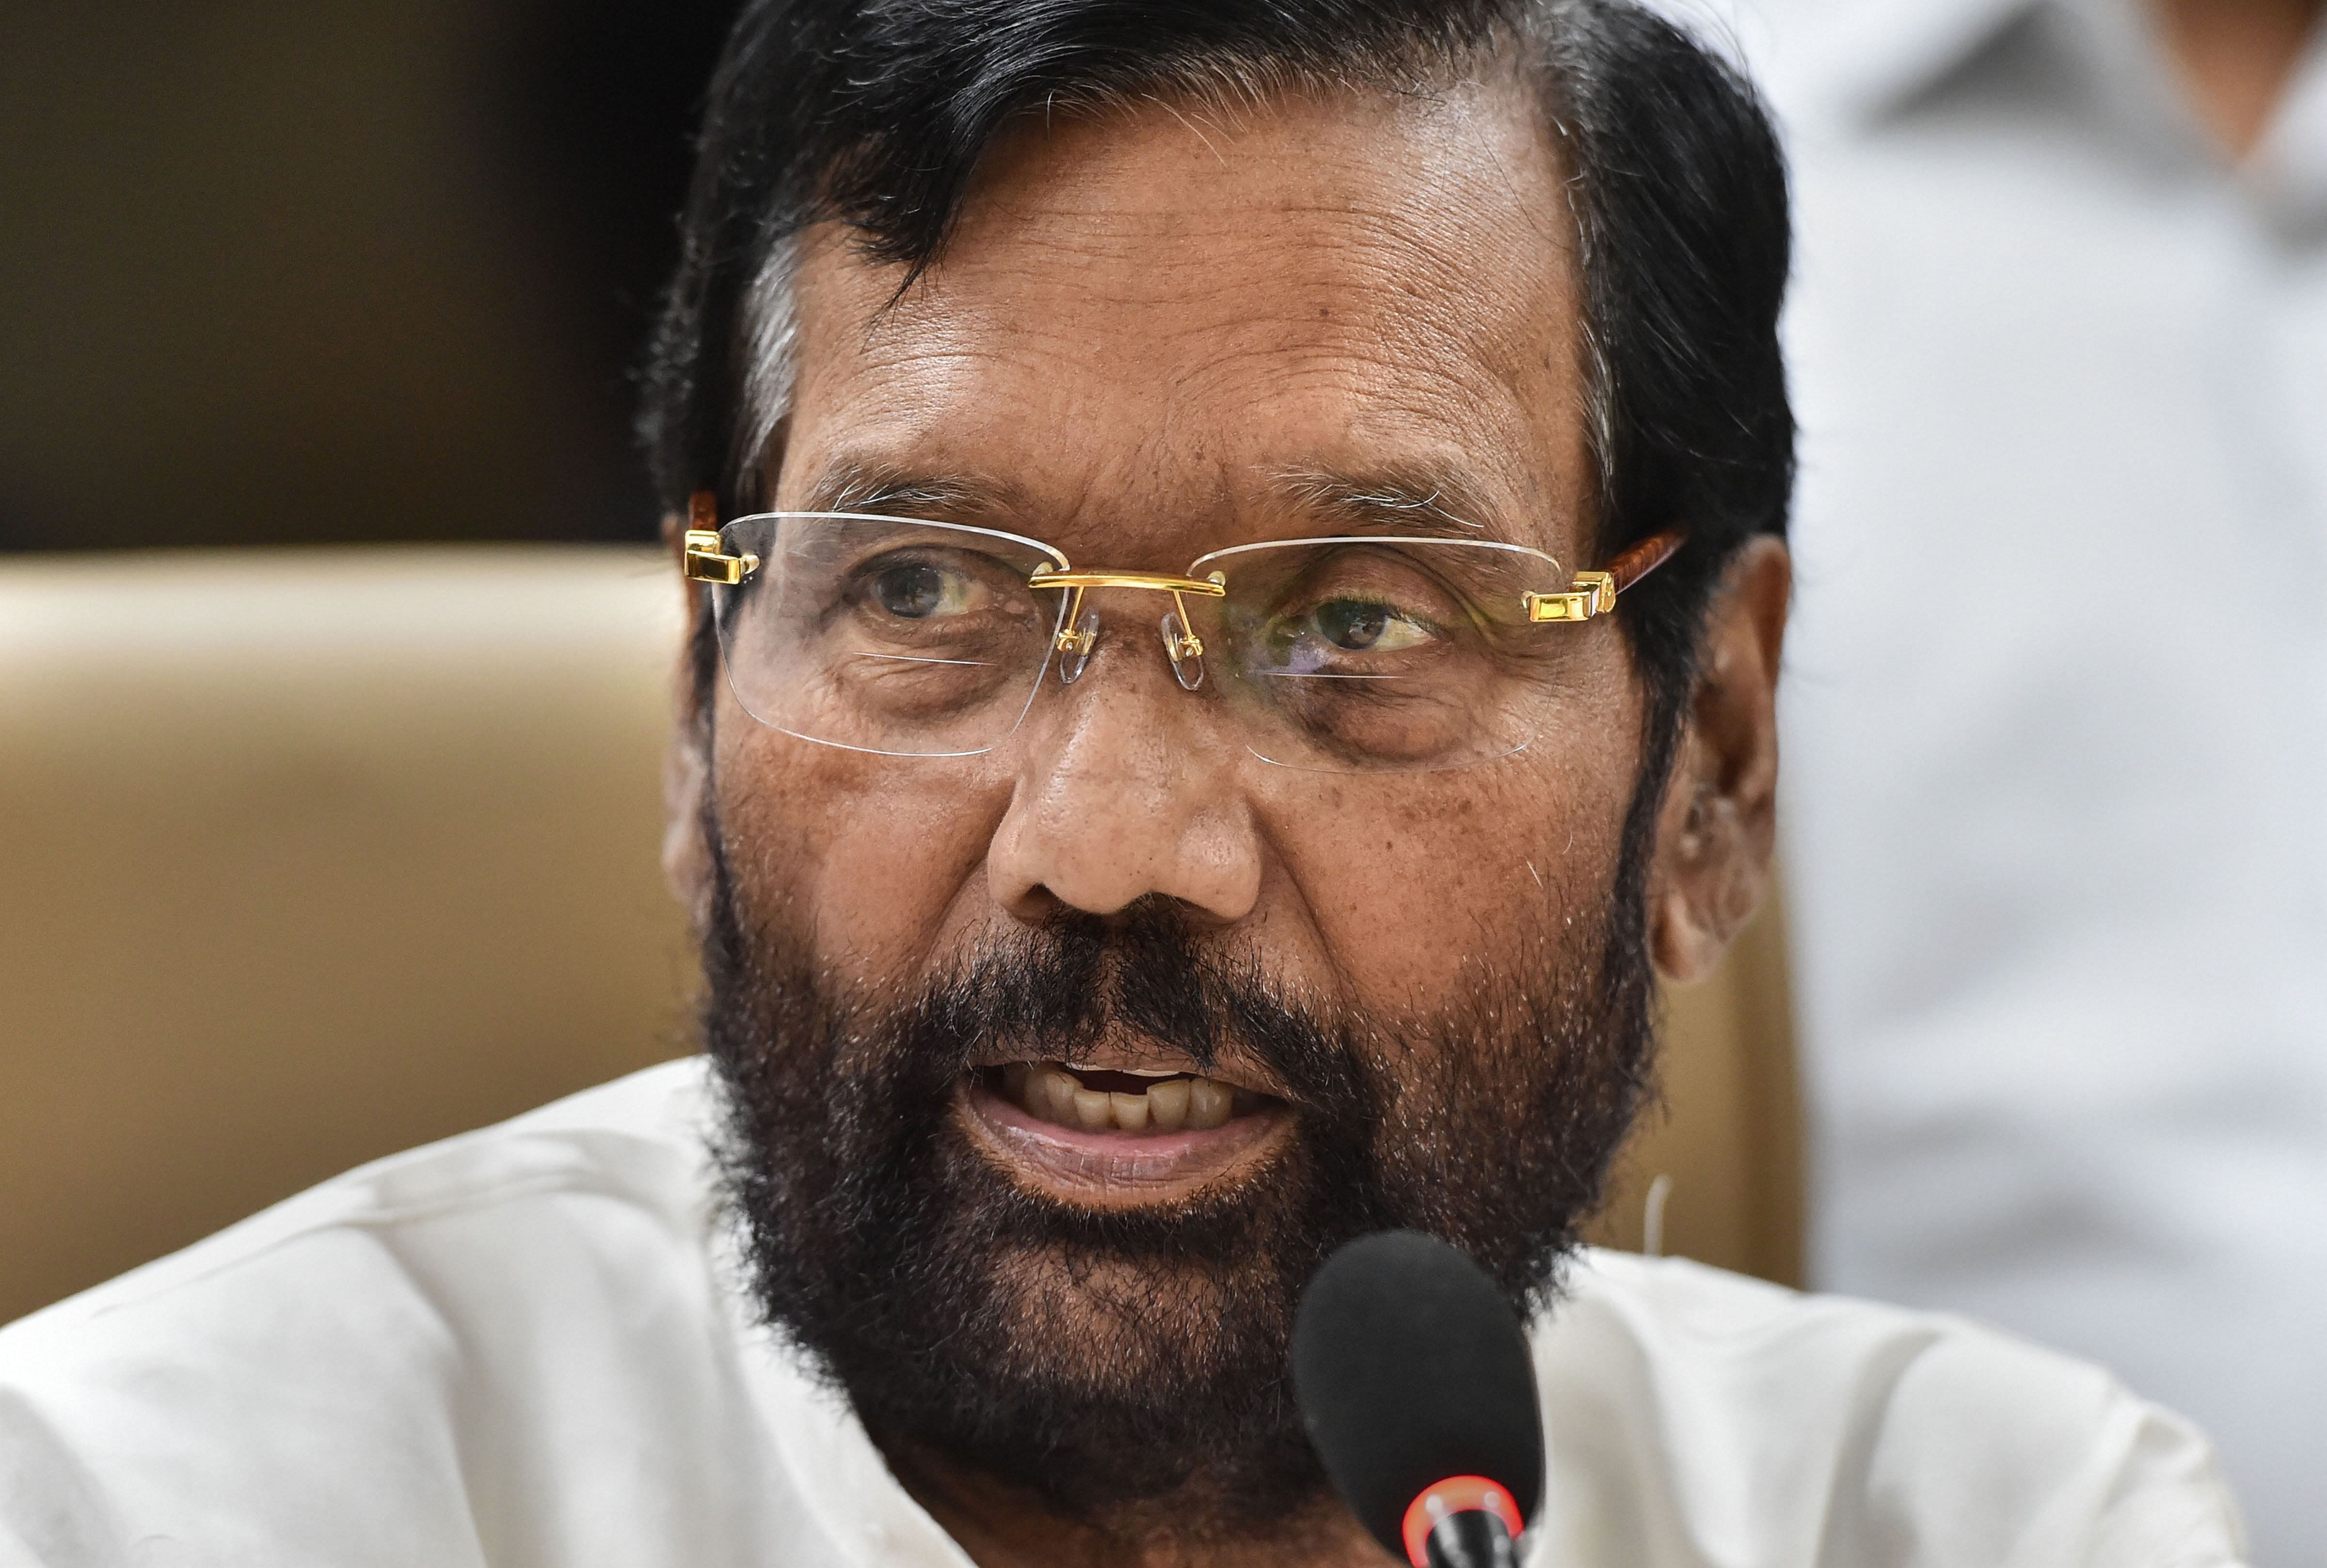 Minister for Consumer Affairs, Food and Public Distribution Ram Vilas Paswan. Credits: PTI Photo